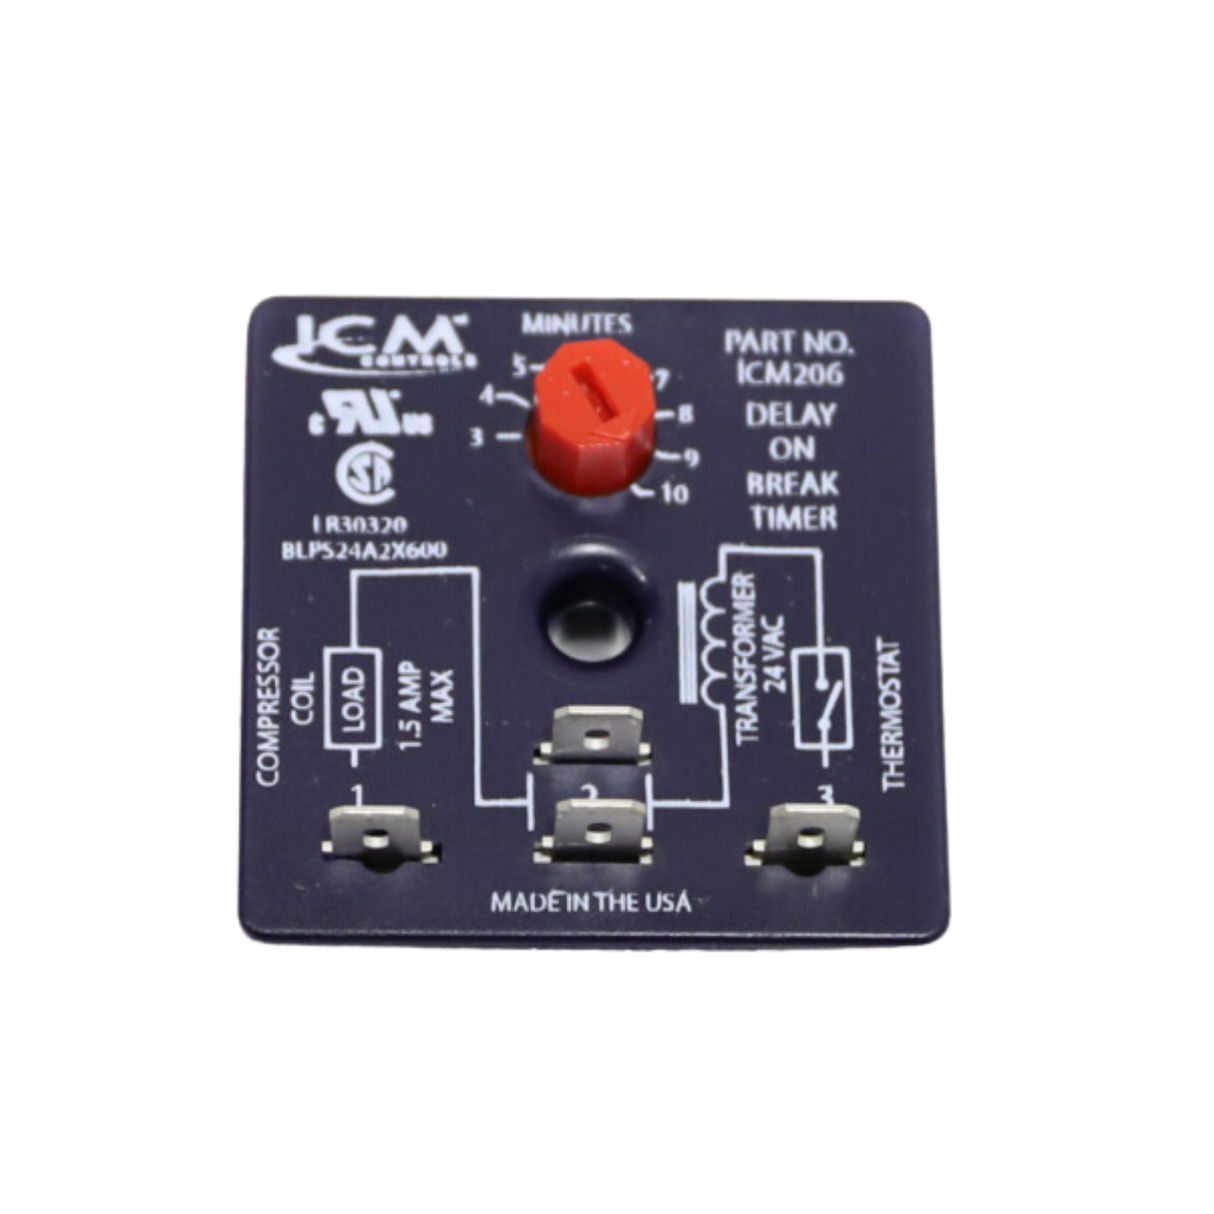 ICM Controls ICM206 18-30VAC, 50-60 Hertz, Delay on Break Timer with 4 Terminals and Adjustable Time Delay Relay